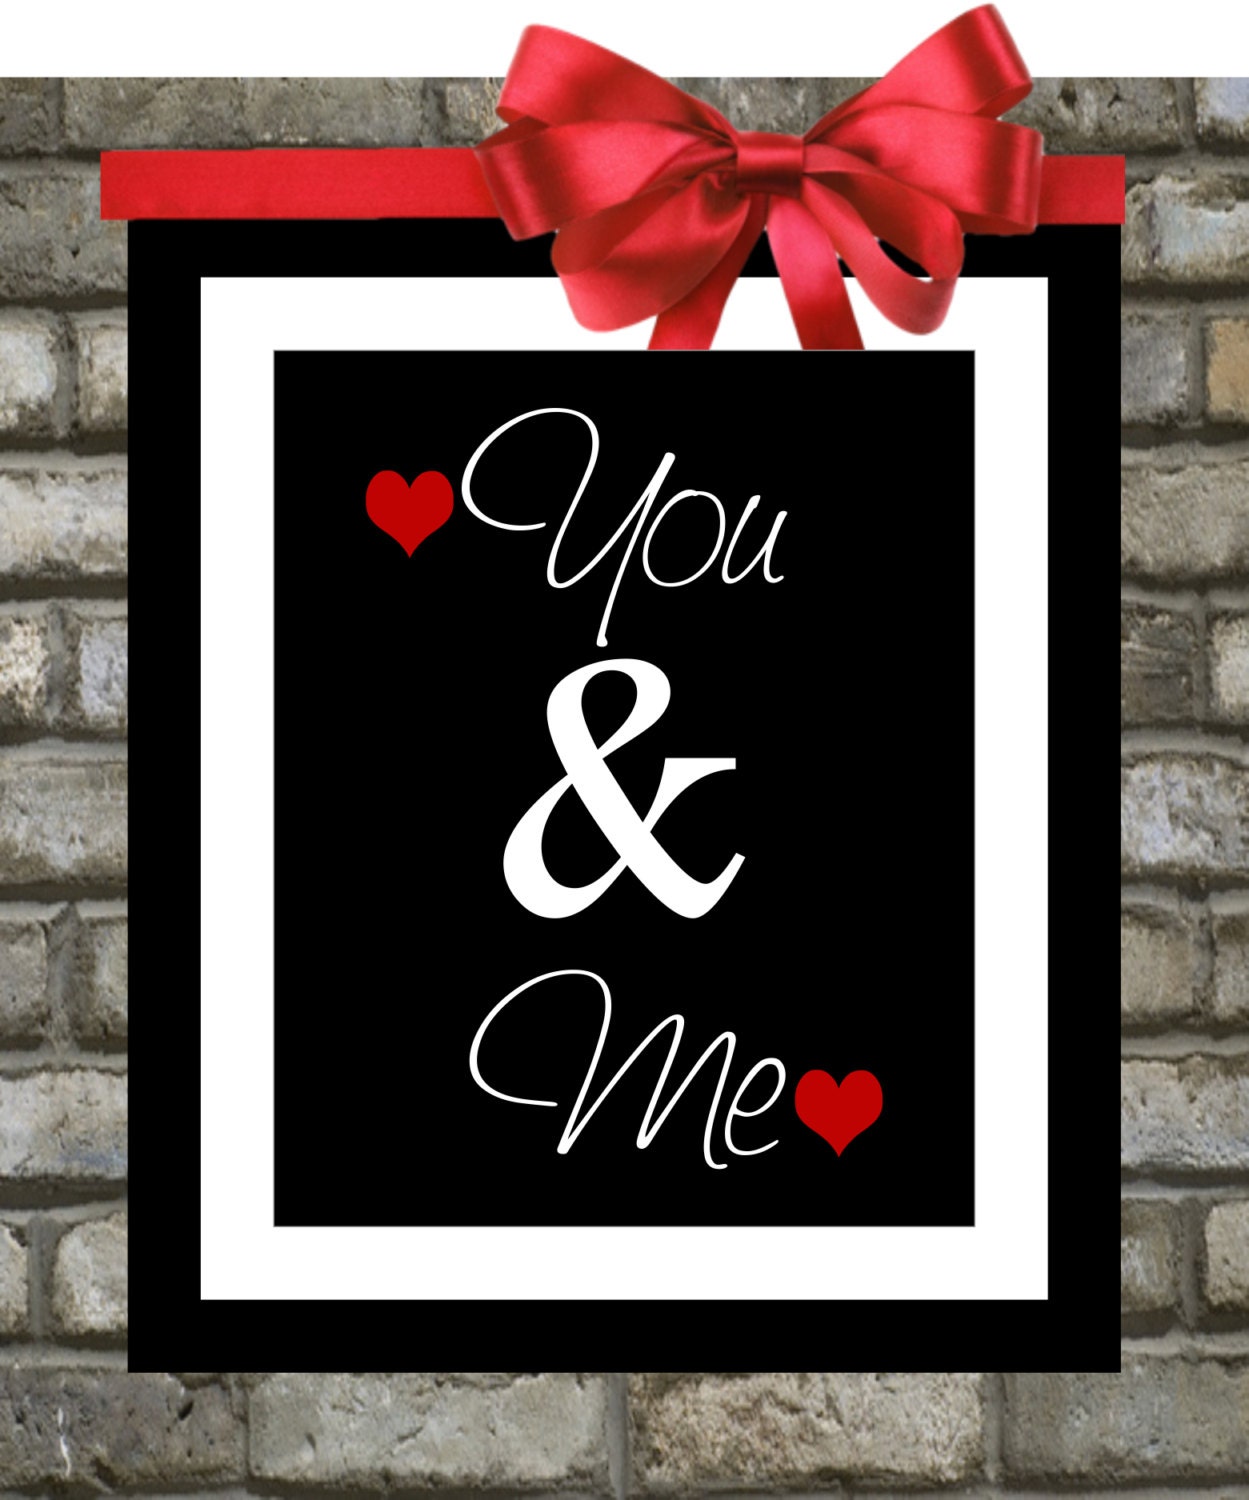 Popular items for Marriage Gift on Etsy